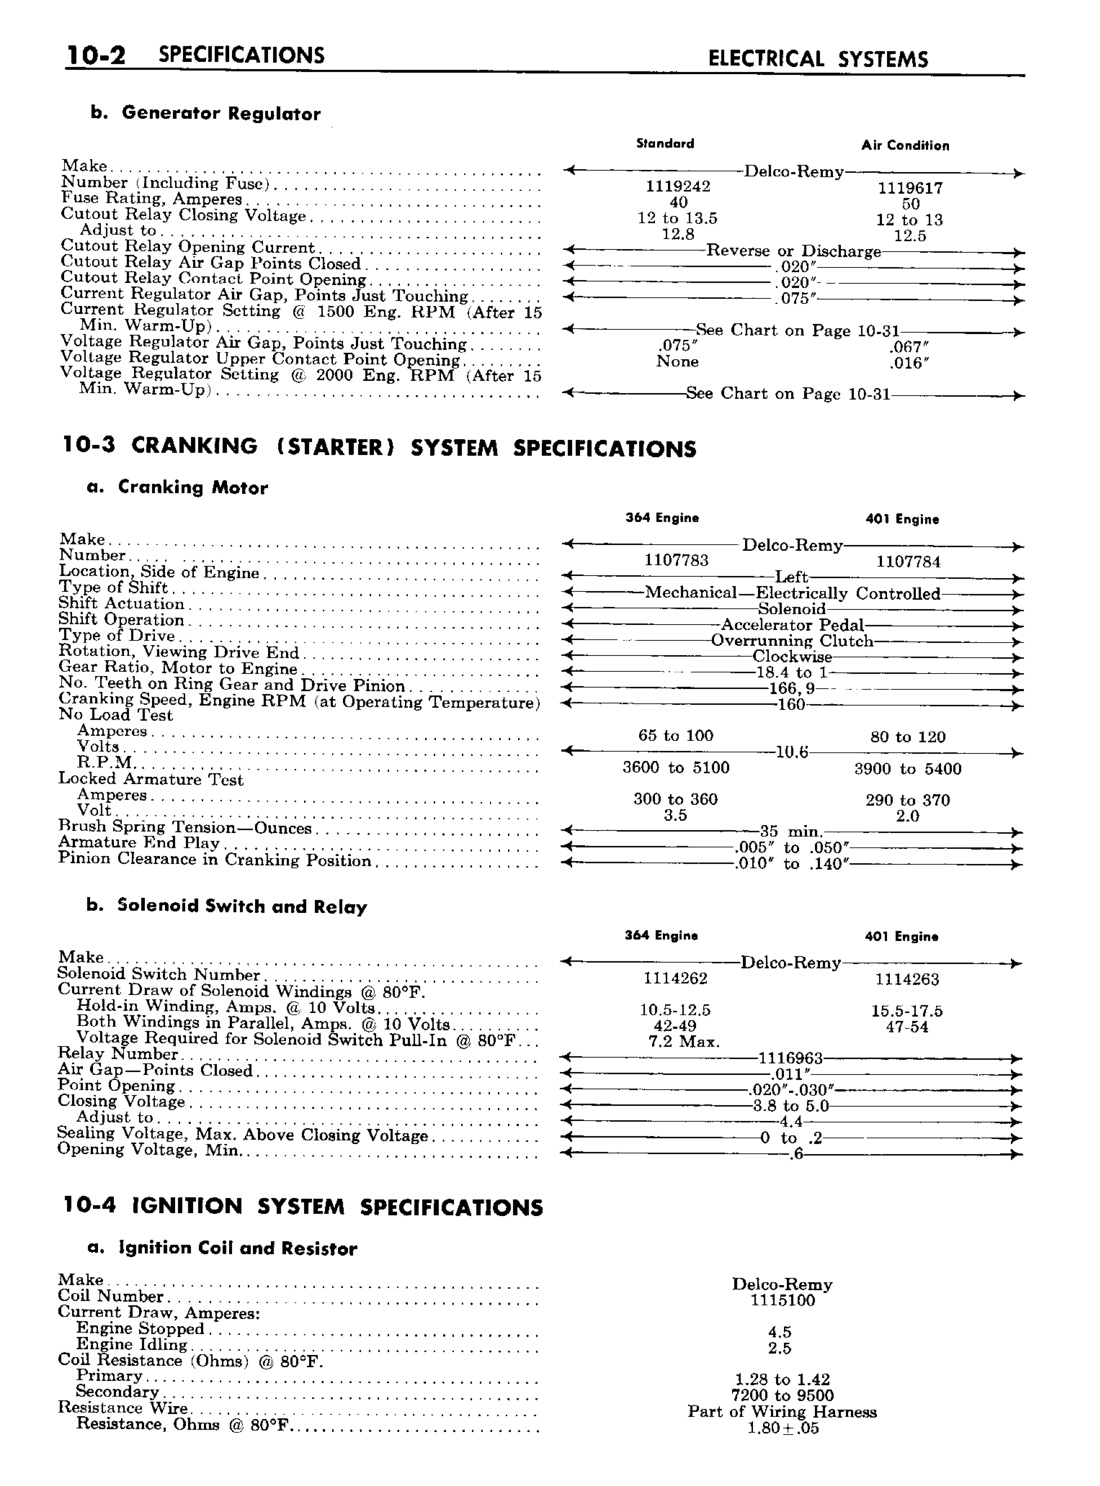 n_11 1960 Buick Shop Manual - Electrical Systems-002-002.jpg